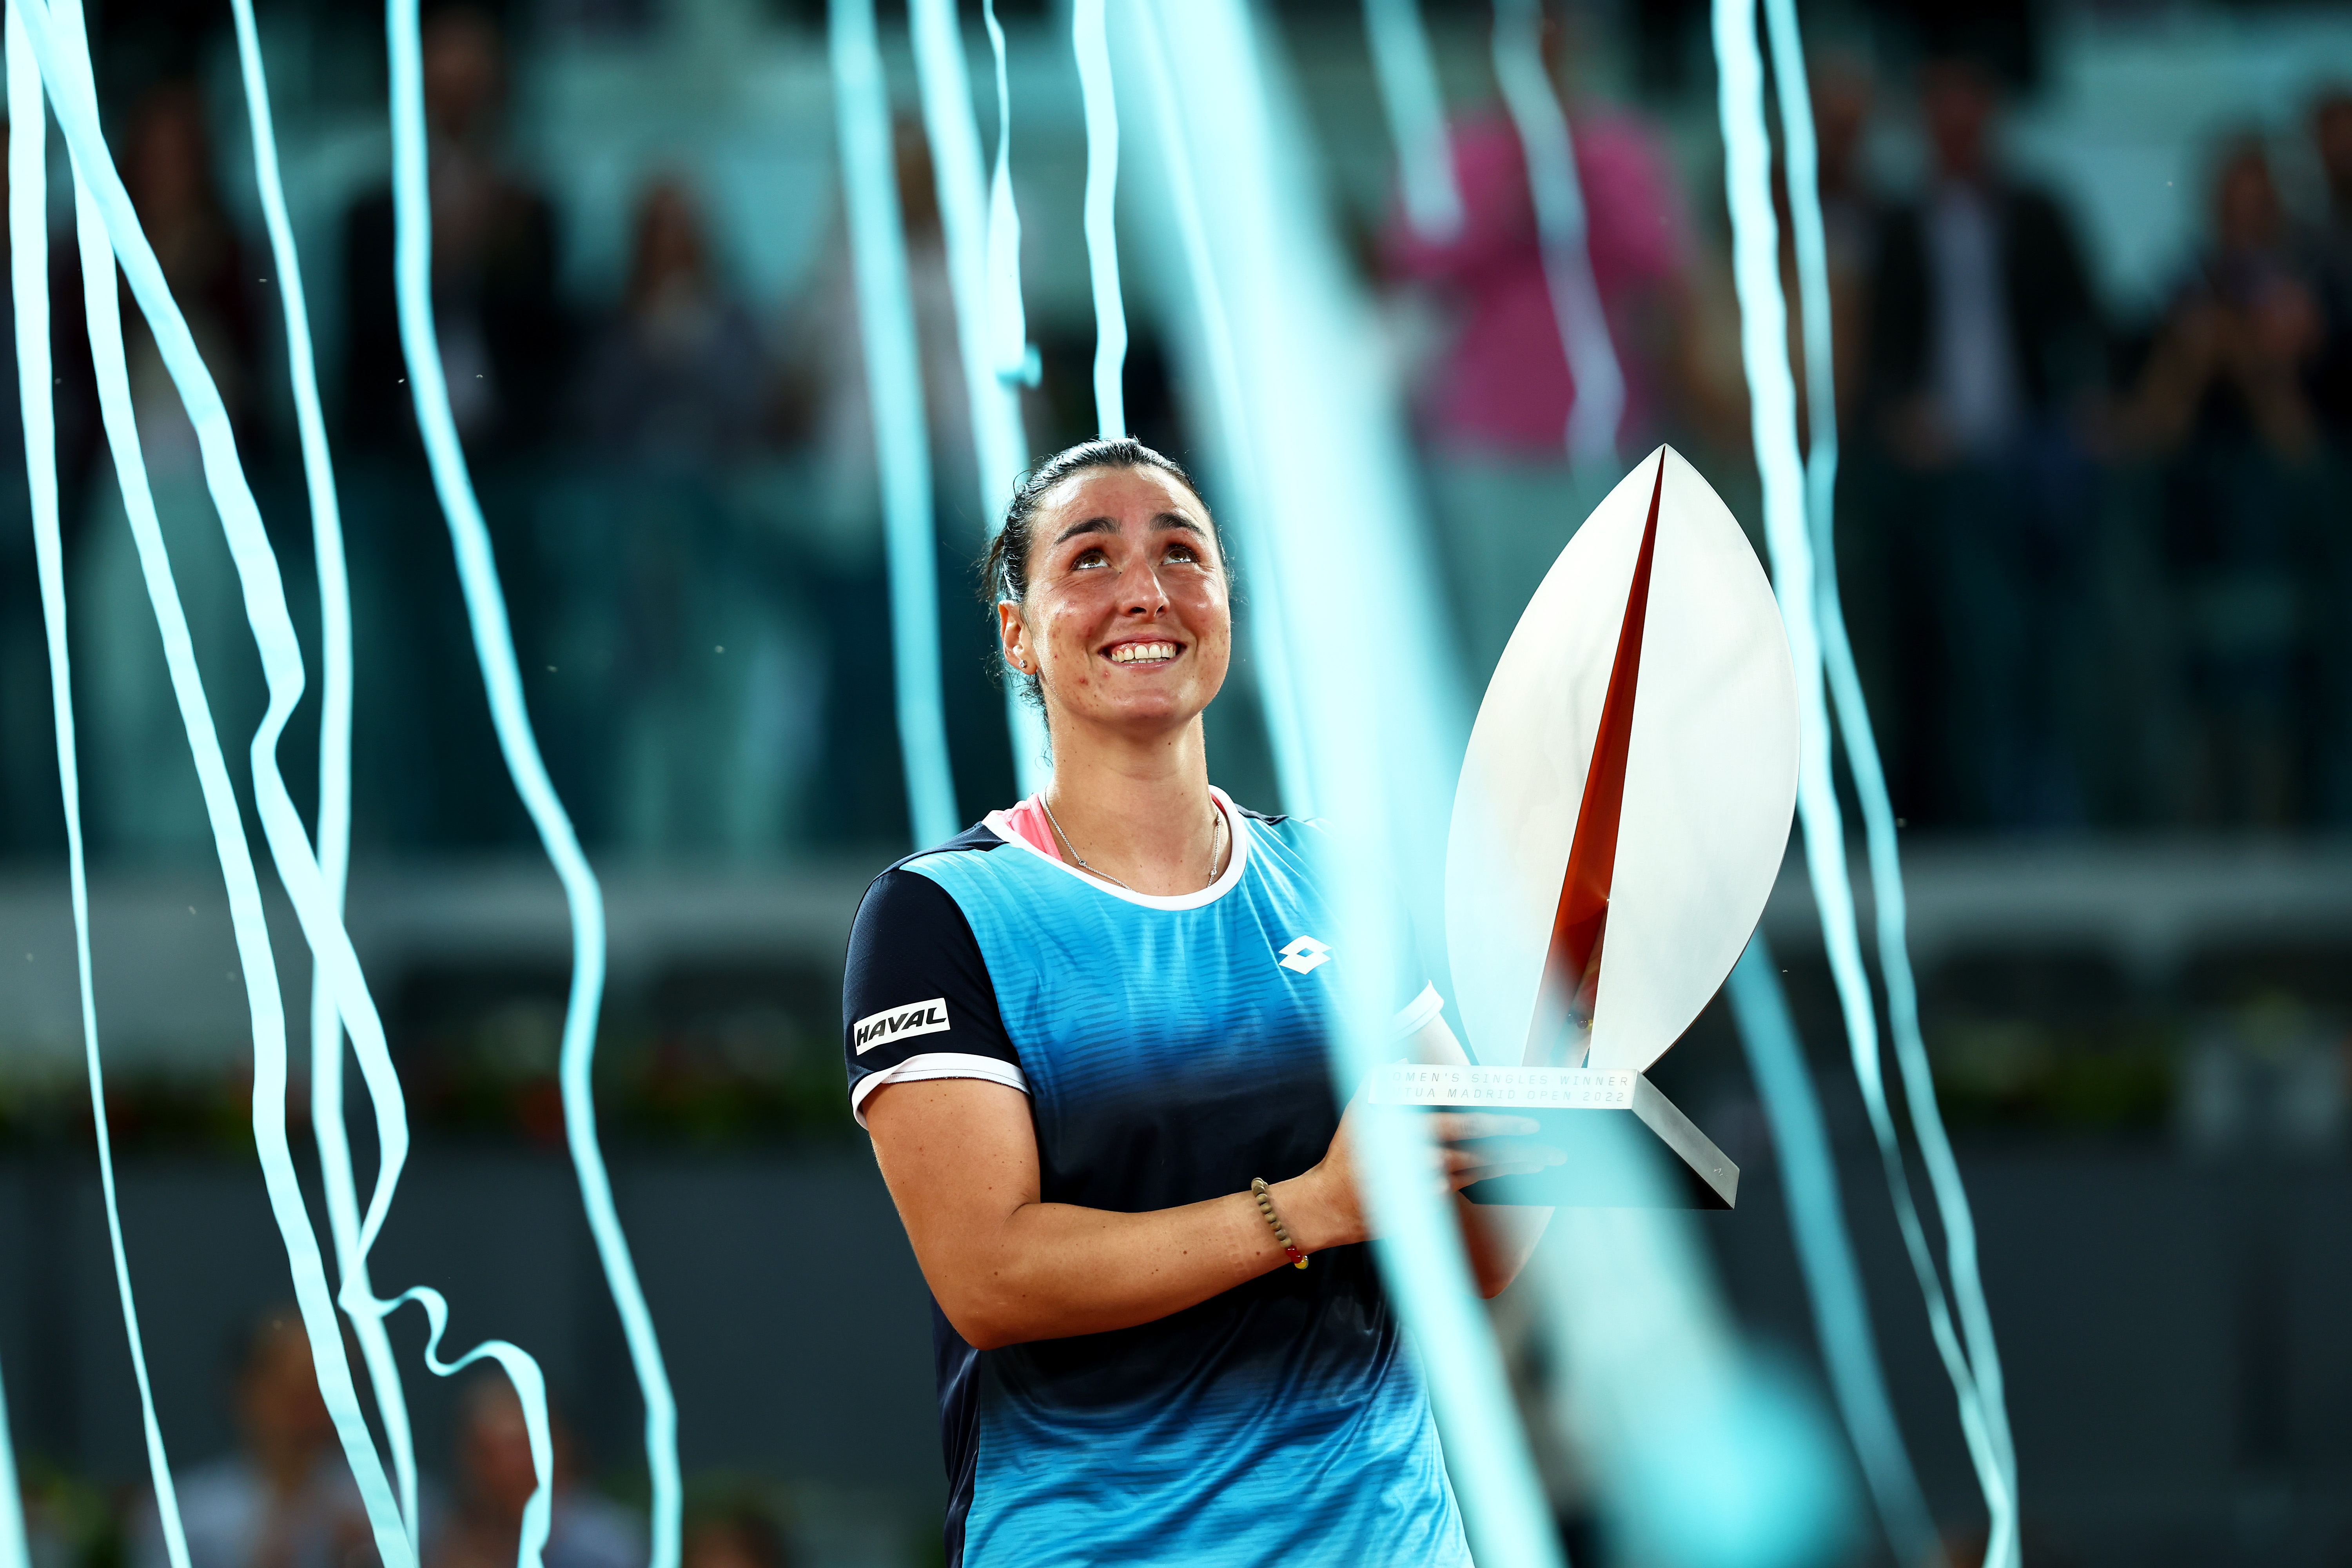 MADRID, SPAIN - MAY 07: Ons Jabeur of Tunisia celebrates with the trophy following victory during the Women's Singles final match against Jessica Pegula of the United States during day ten of Mutua Madrid Open at La Caja Magica on May 07, 2022 in Madrid, Spain. (Photo by Clive Brunskill/Getty Images)